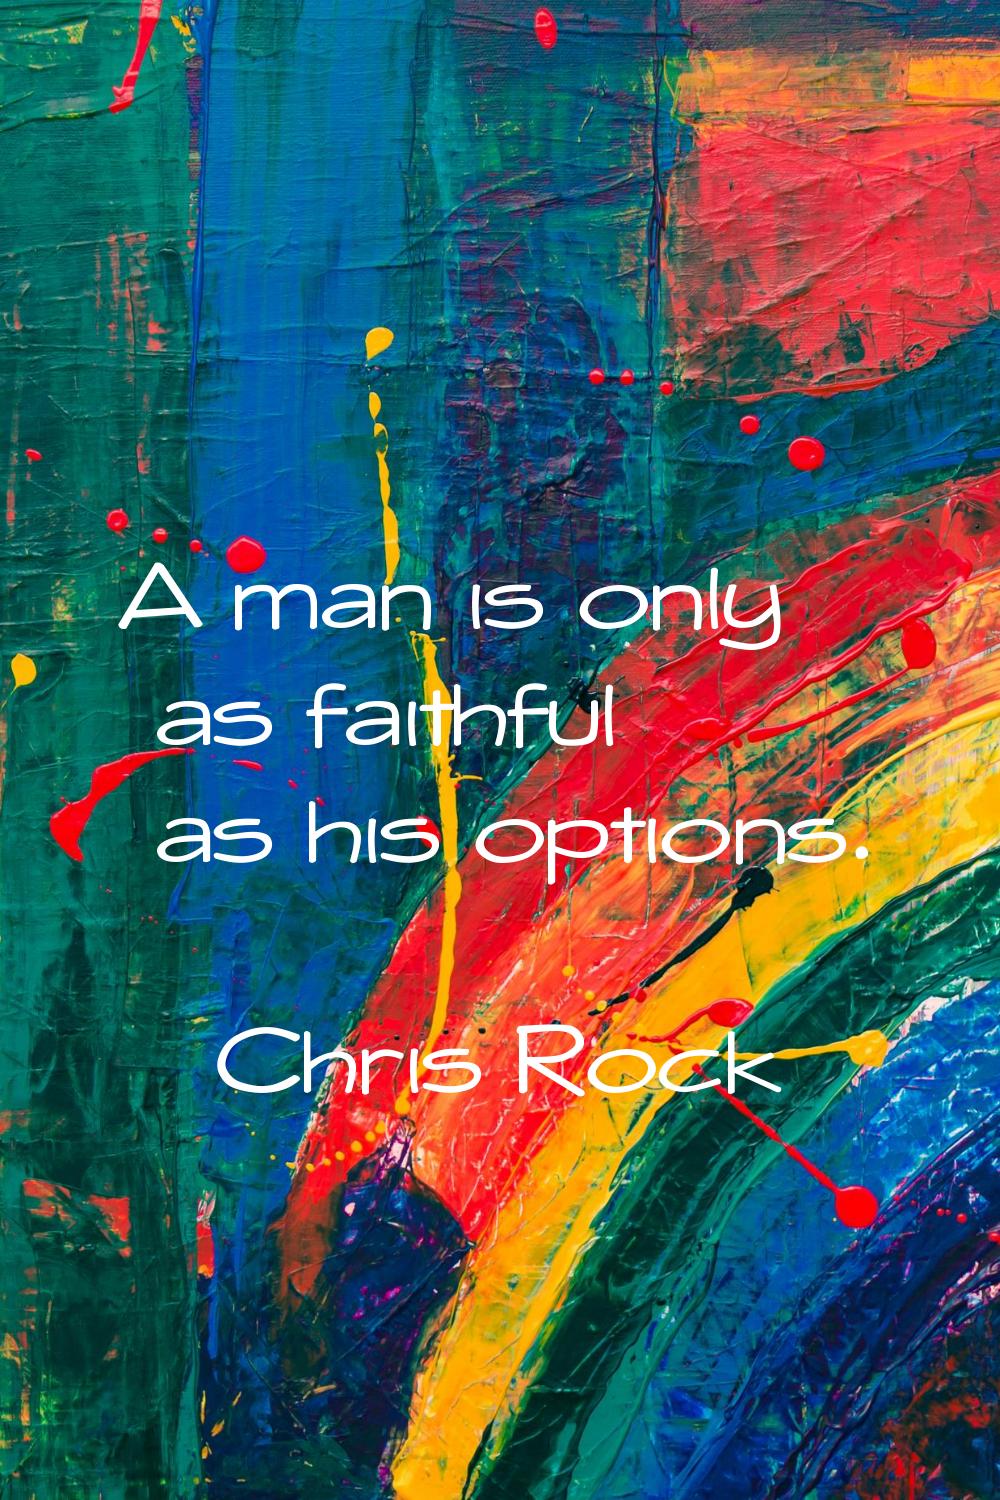 A man is only as faithful as his options.